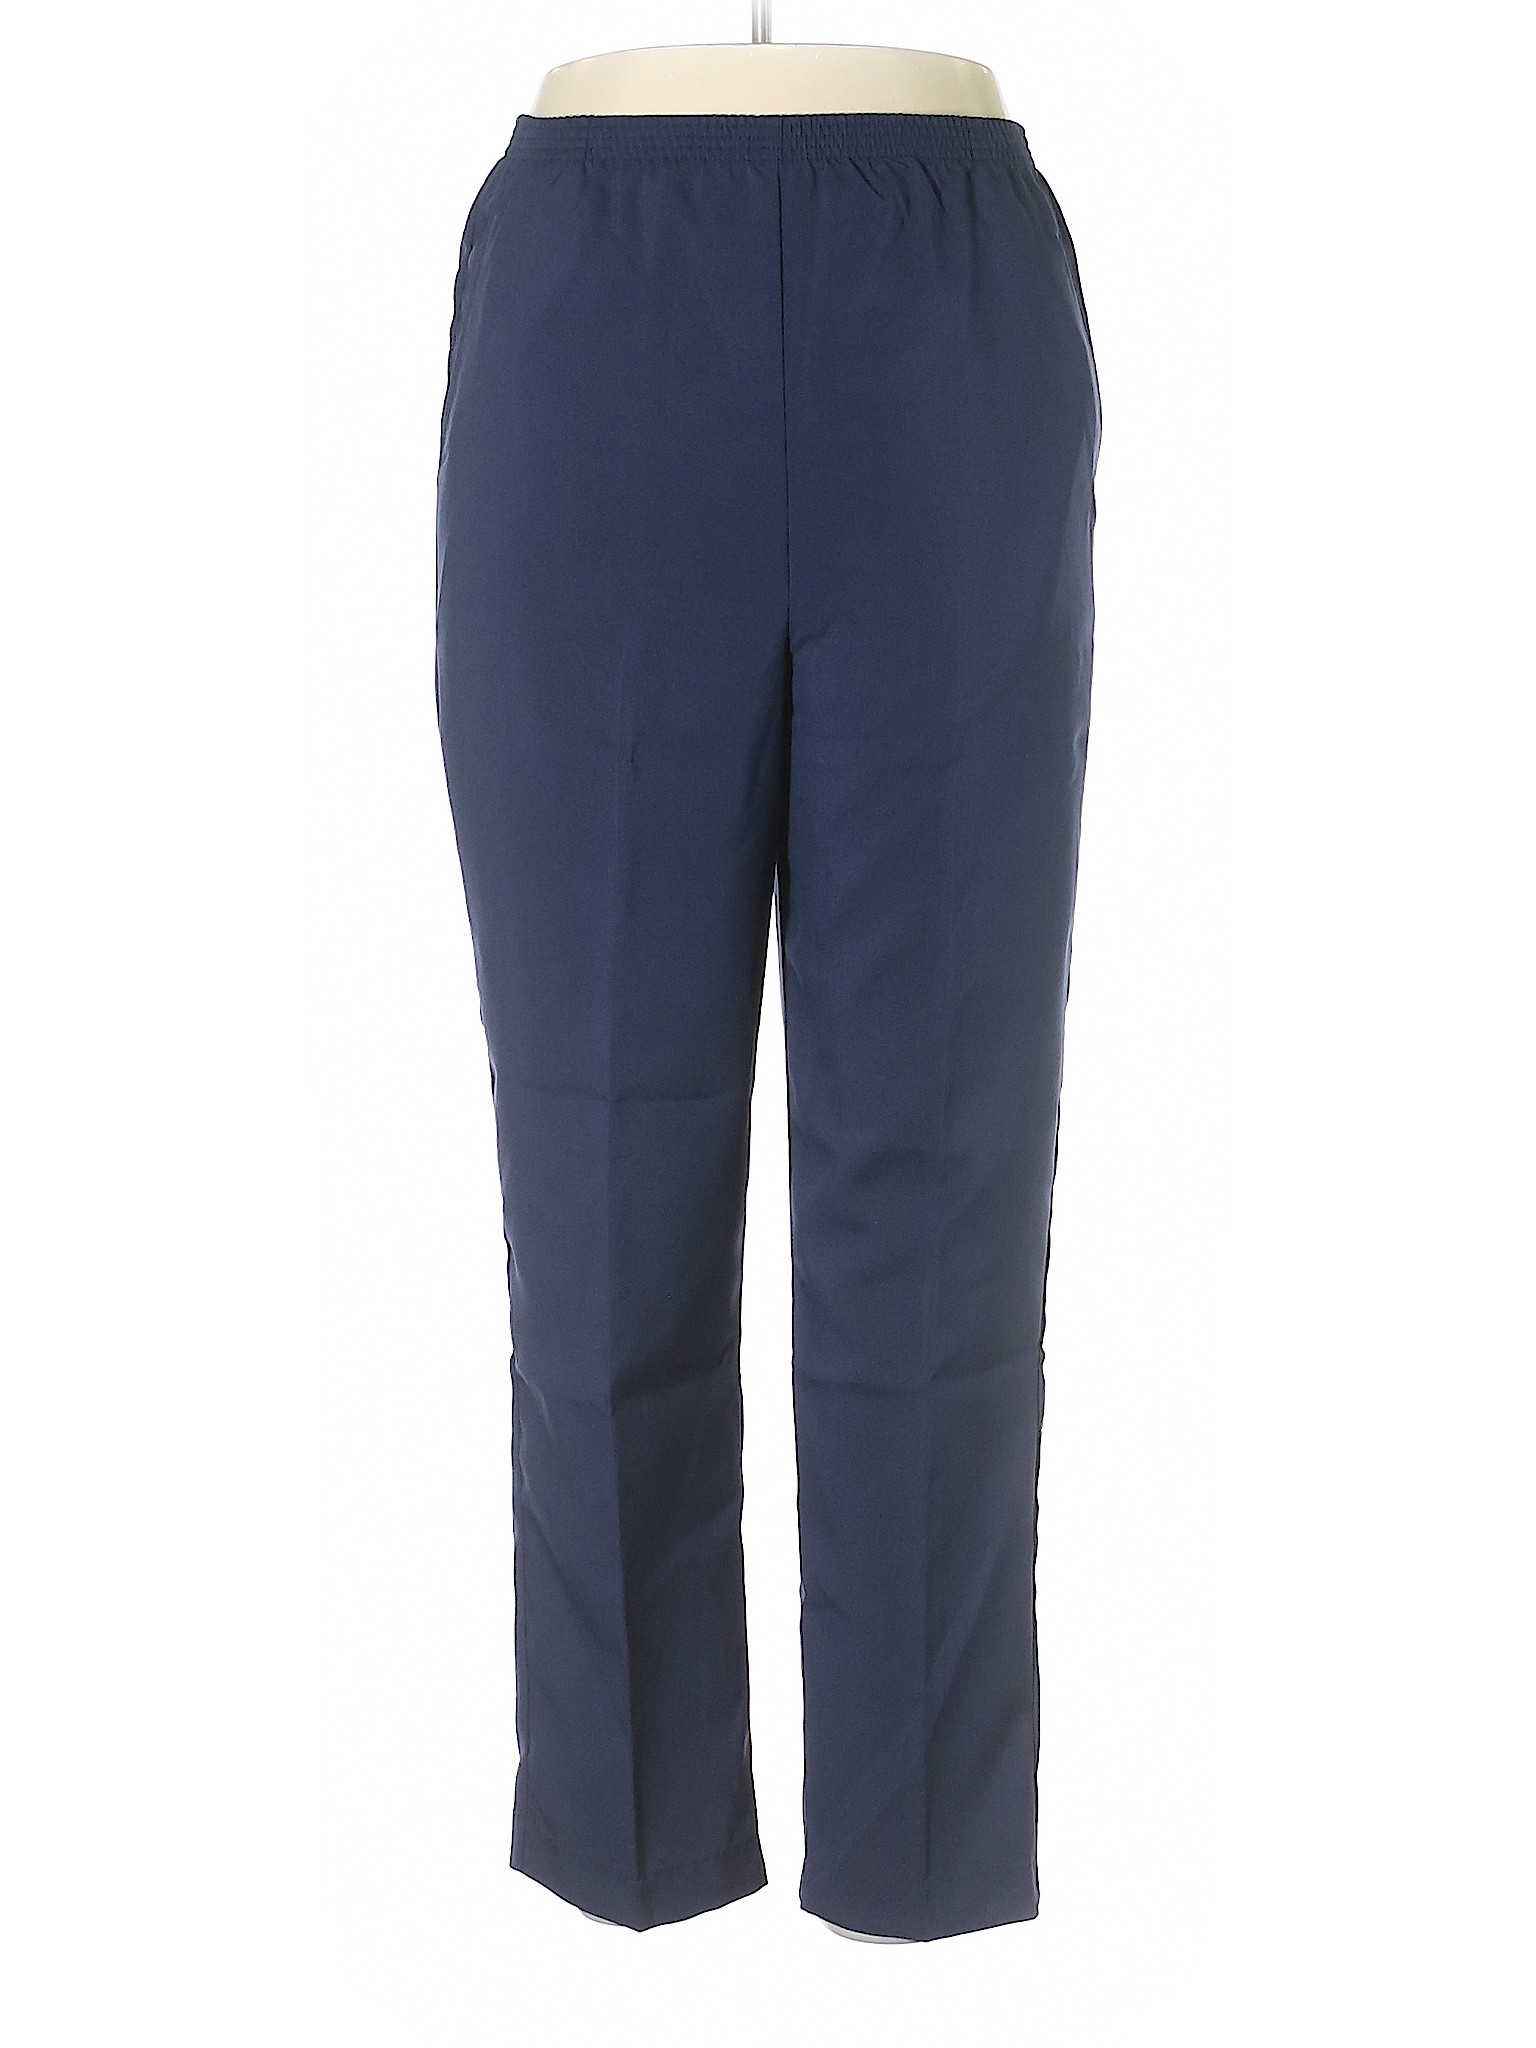 CW Classics 100% Polyester Solid Blue Dress Pants Size L - 75% off ...